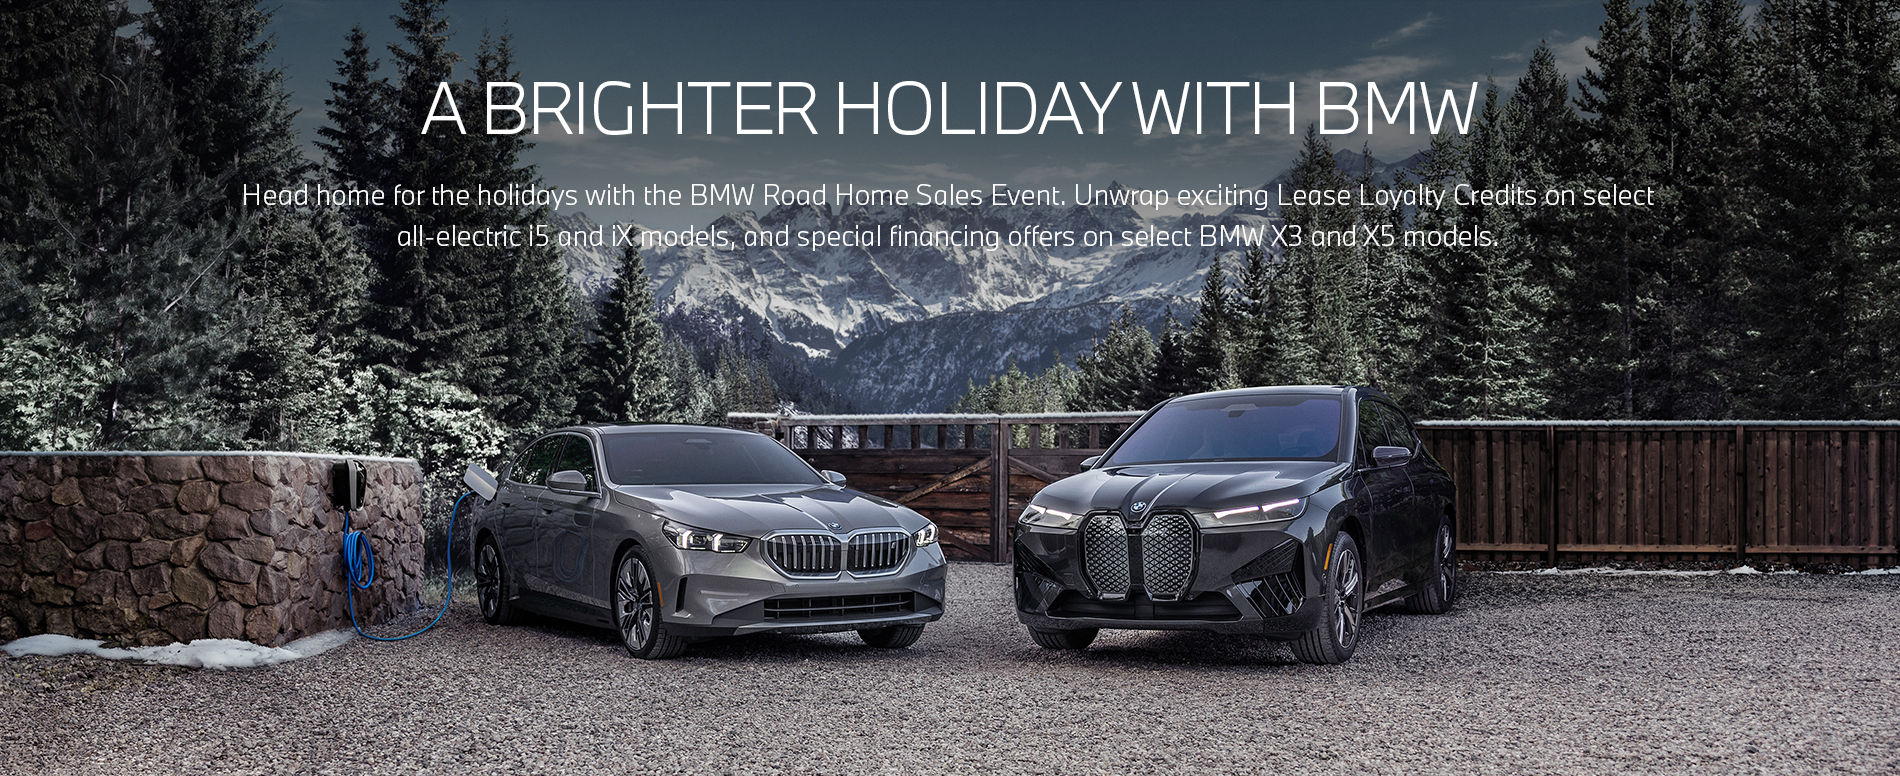 The 2024 i5 eDrive40, plugged into a BMW Wallbox charger, and the 2024 iX xDrive50 parked in front of a beautiful wintry mountain landscape